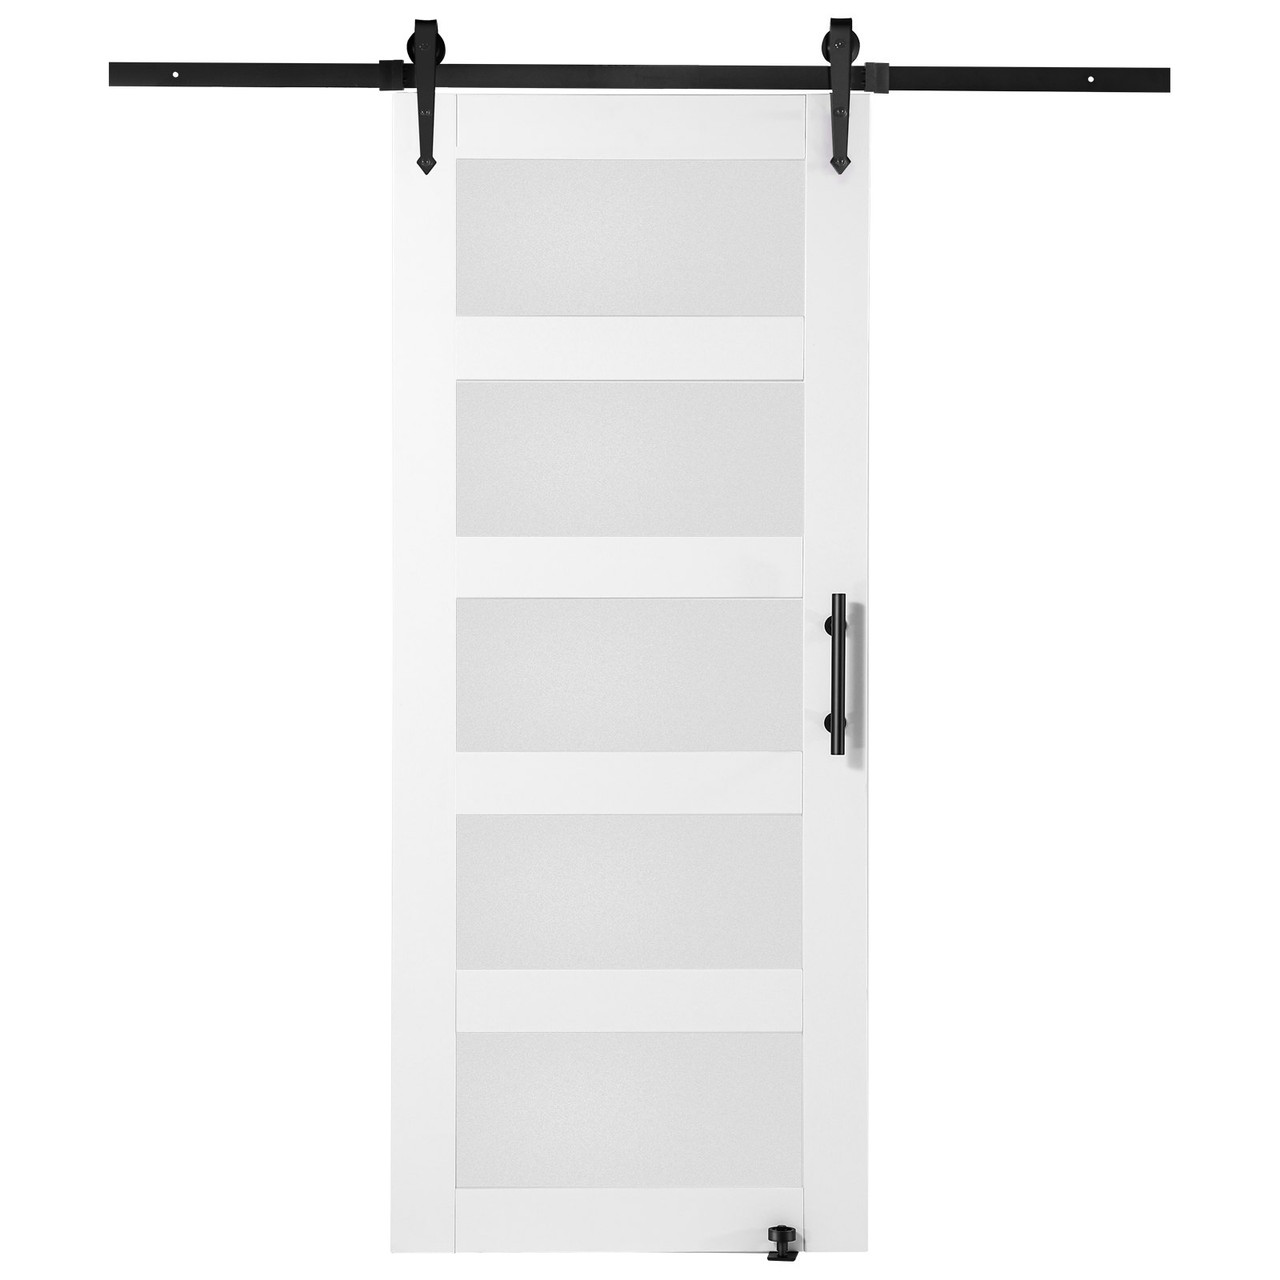 VEVOR Barn Door and Hardware Kit, 32" x 84" Wood and Glass Sliding Barn Door, Smoothly and Quietly, Barn Door Kit with 8-in-1 Floor Guide and Door Handle, Spruce Wood Slab and Frosted Glass